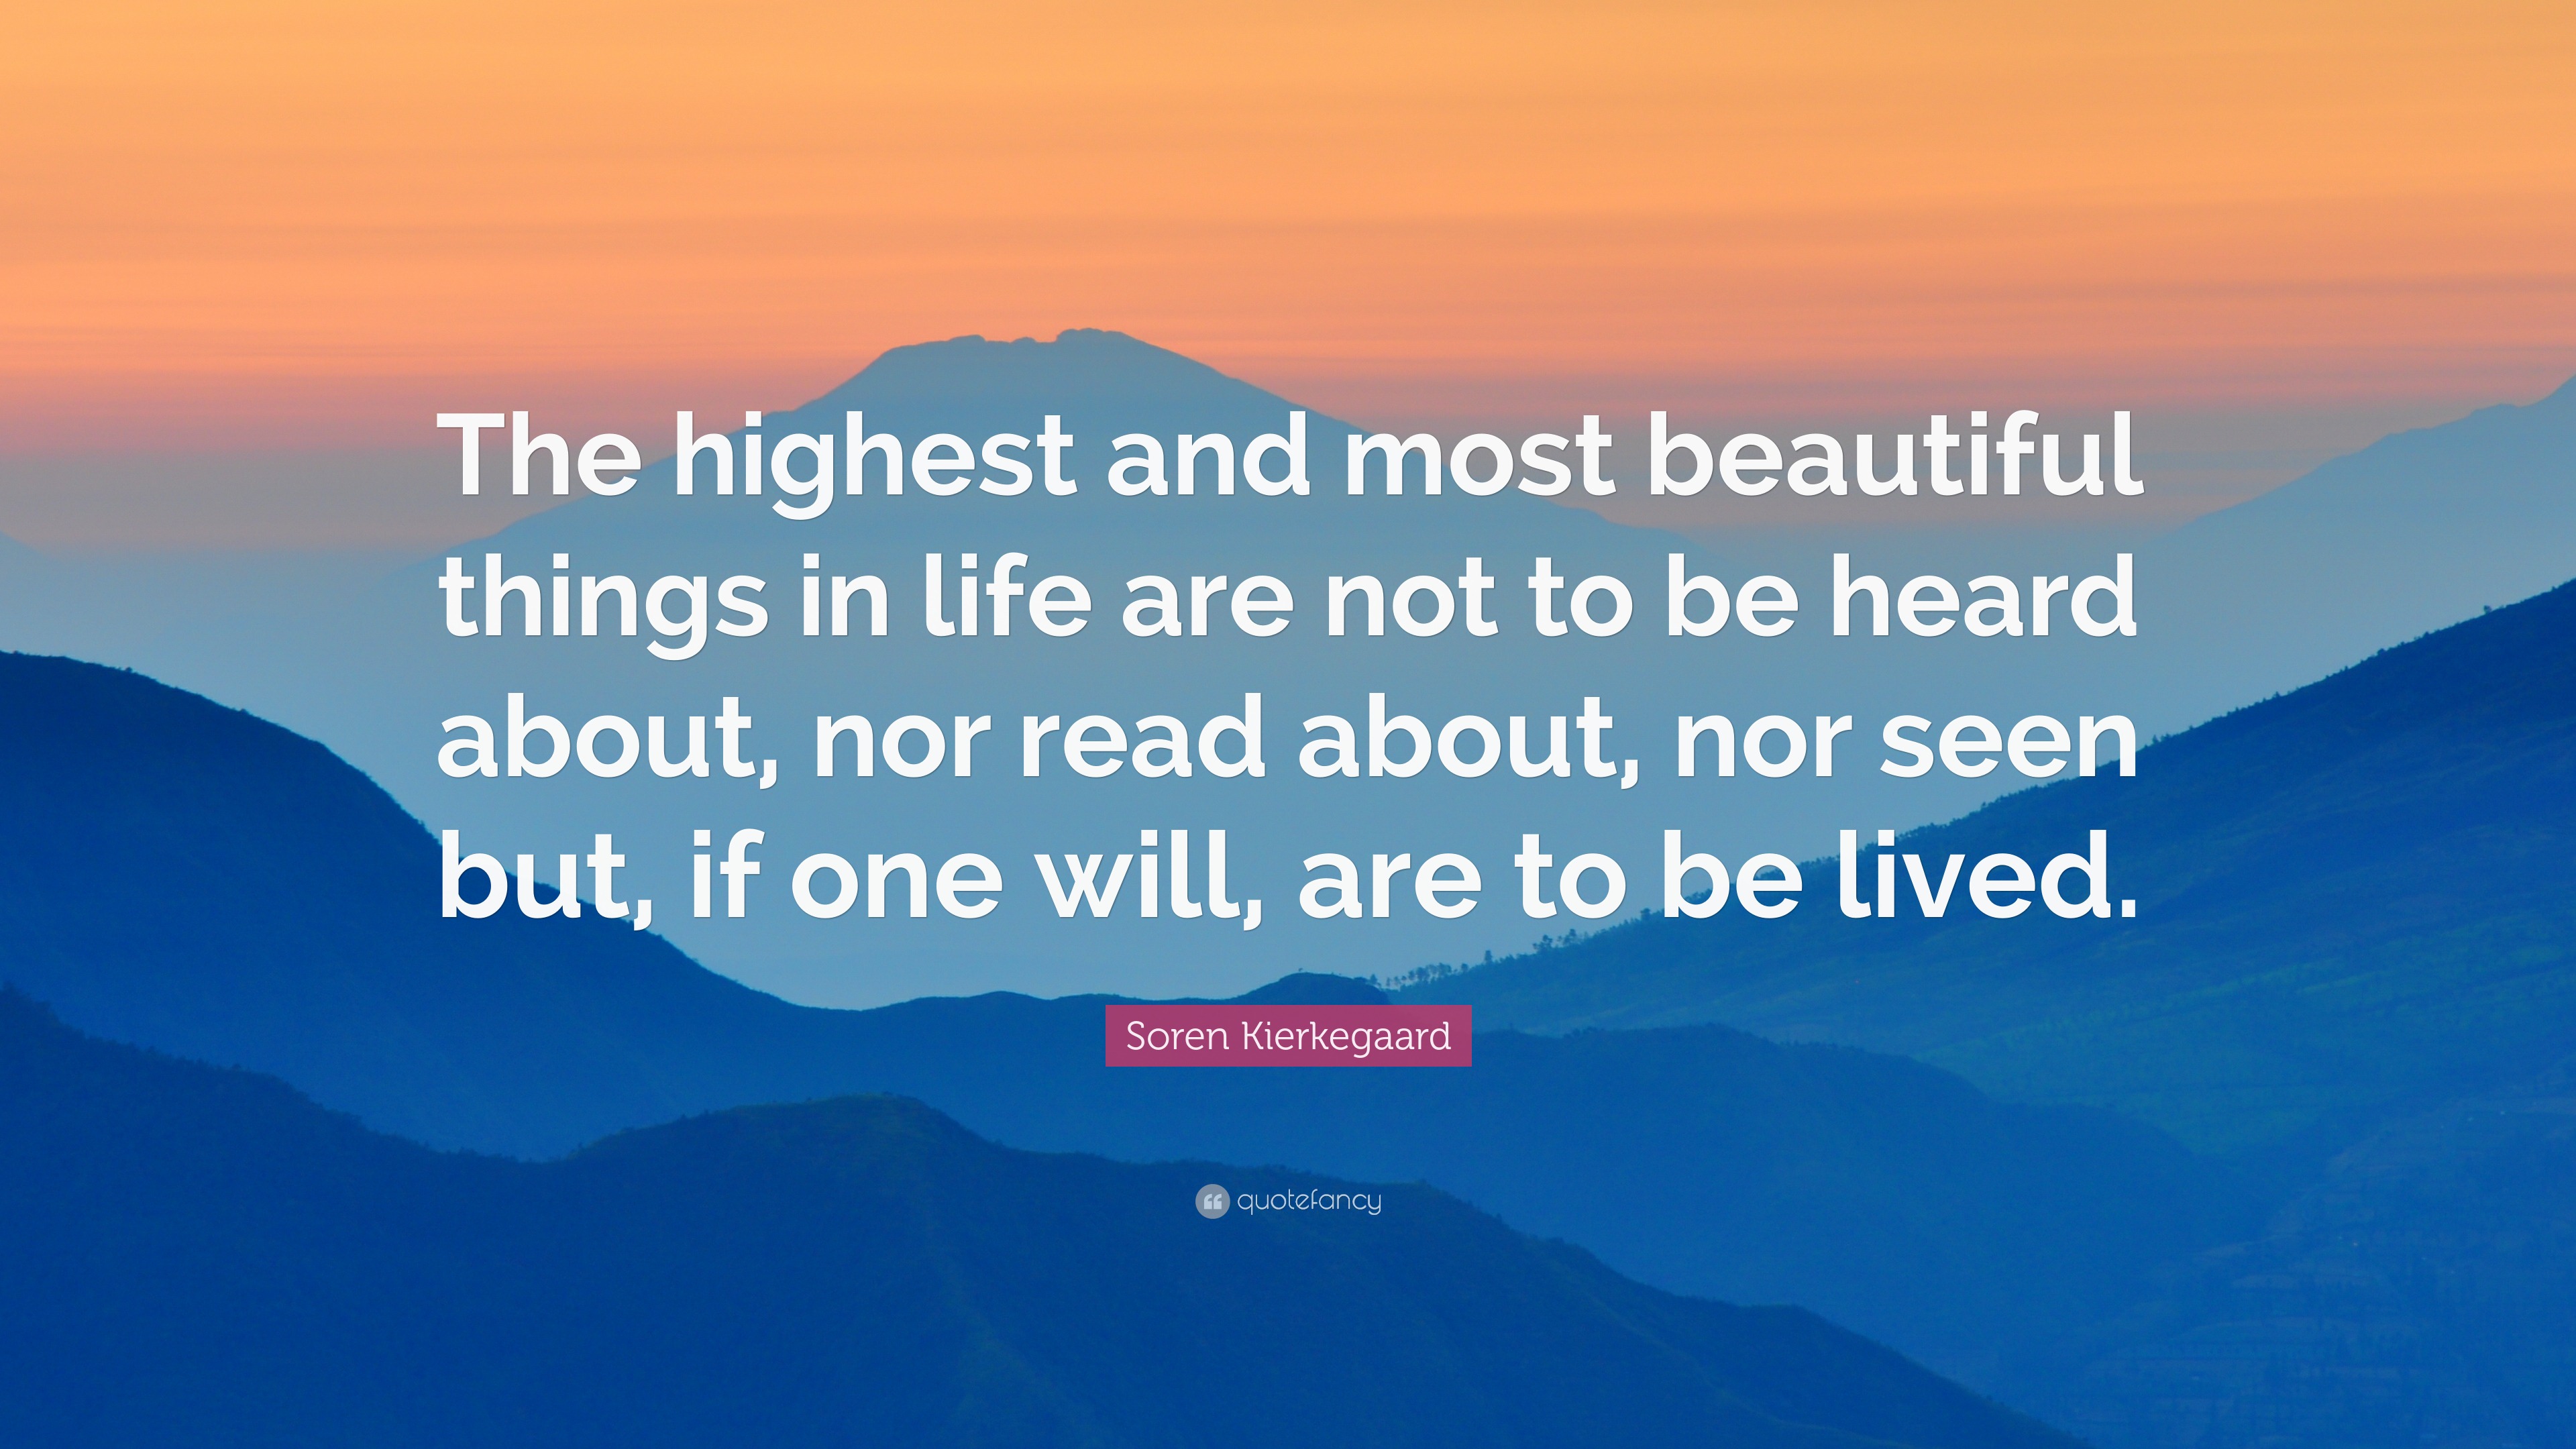 Soren Kierkegaard Quote “The highest and most beautiful things in life are not to